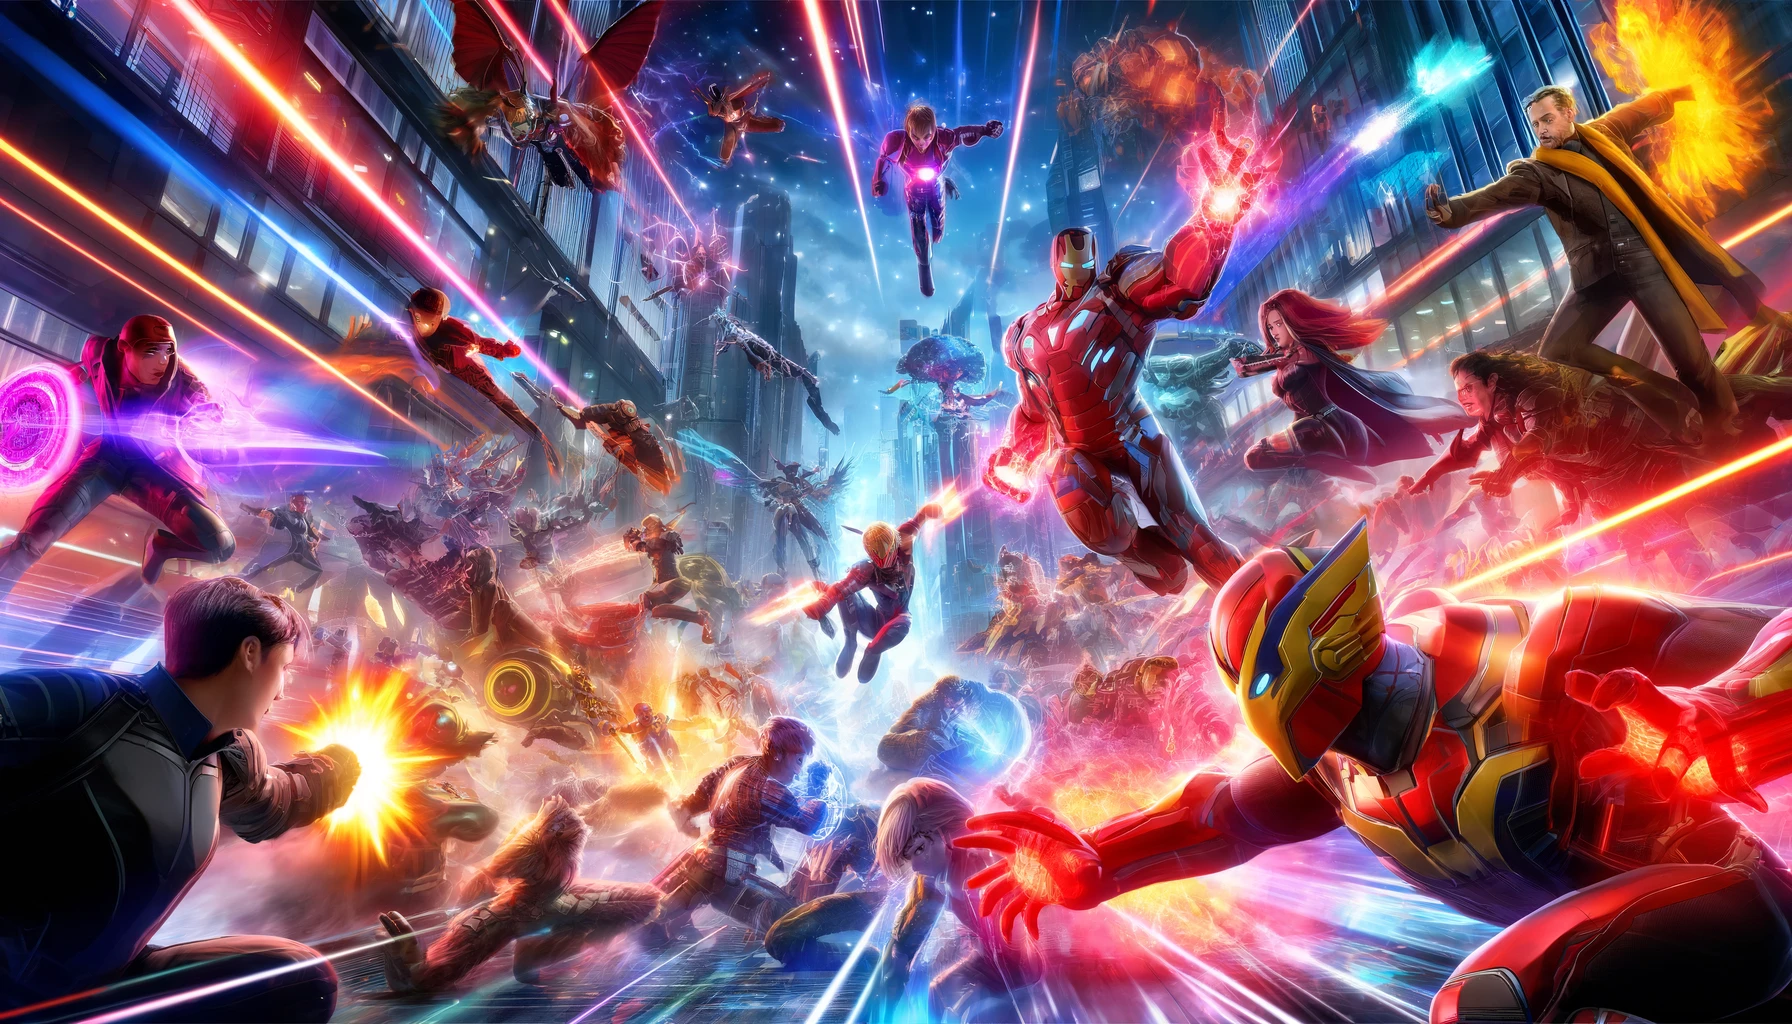 A dynamic and intense battle scene in Marvel Snap, featuring several powerful characters in combat within a futuristic cityscape. Energy blasts and dramatic effects fill the air, capturing the excitement and thrill of the game.